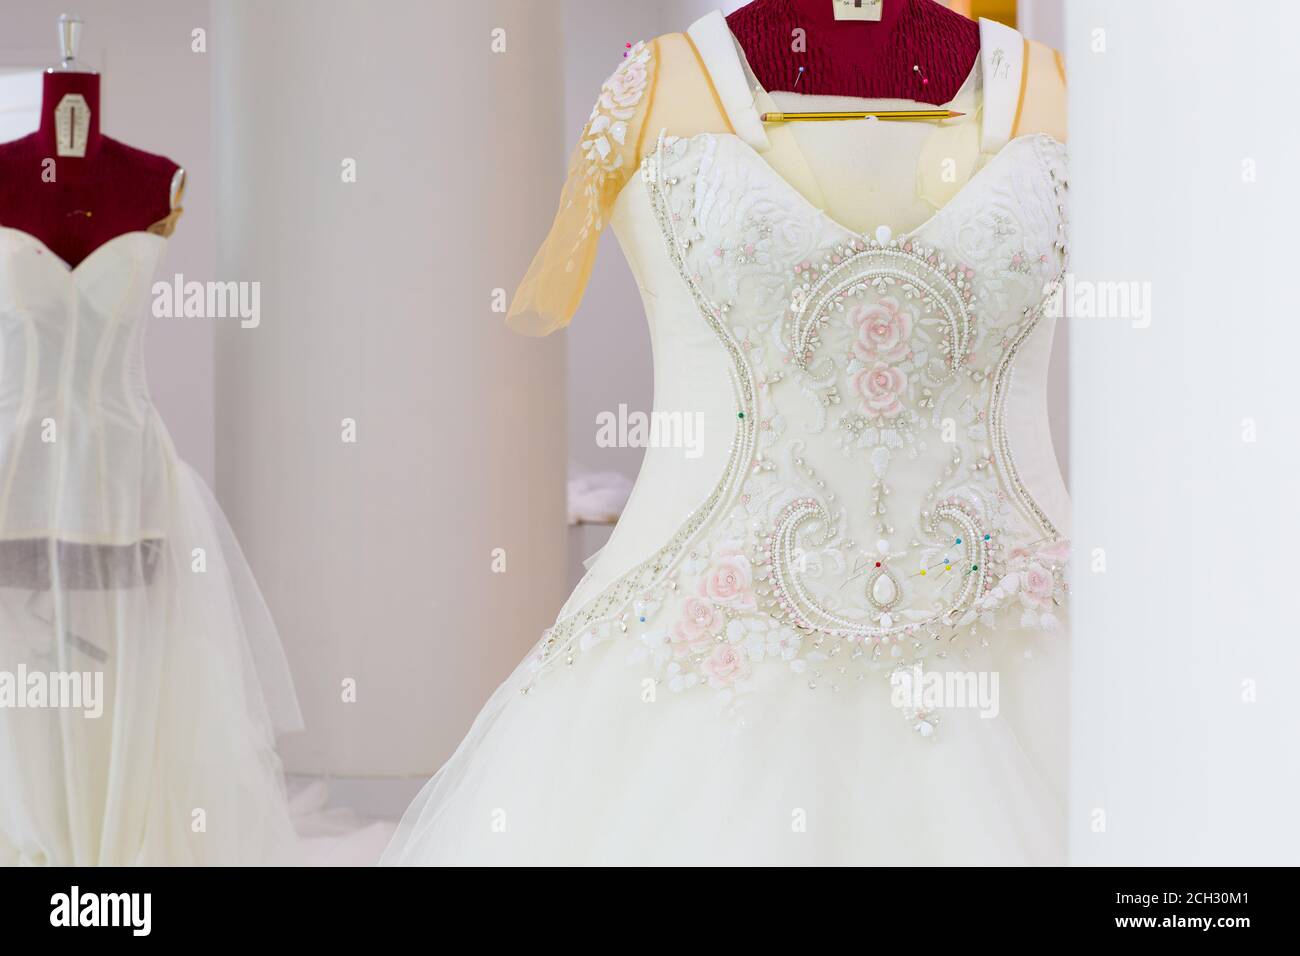 Beautiful haute-couture wedding dress with handmade intricate embroidery and crystal details on a mannequin in a bridal design workshop. Stock Photo